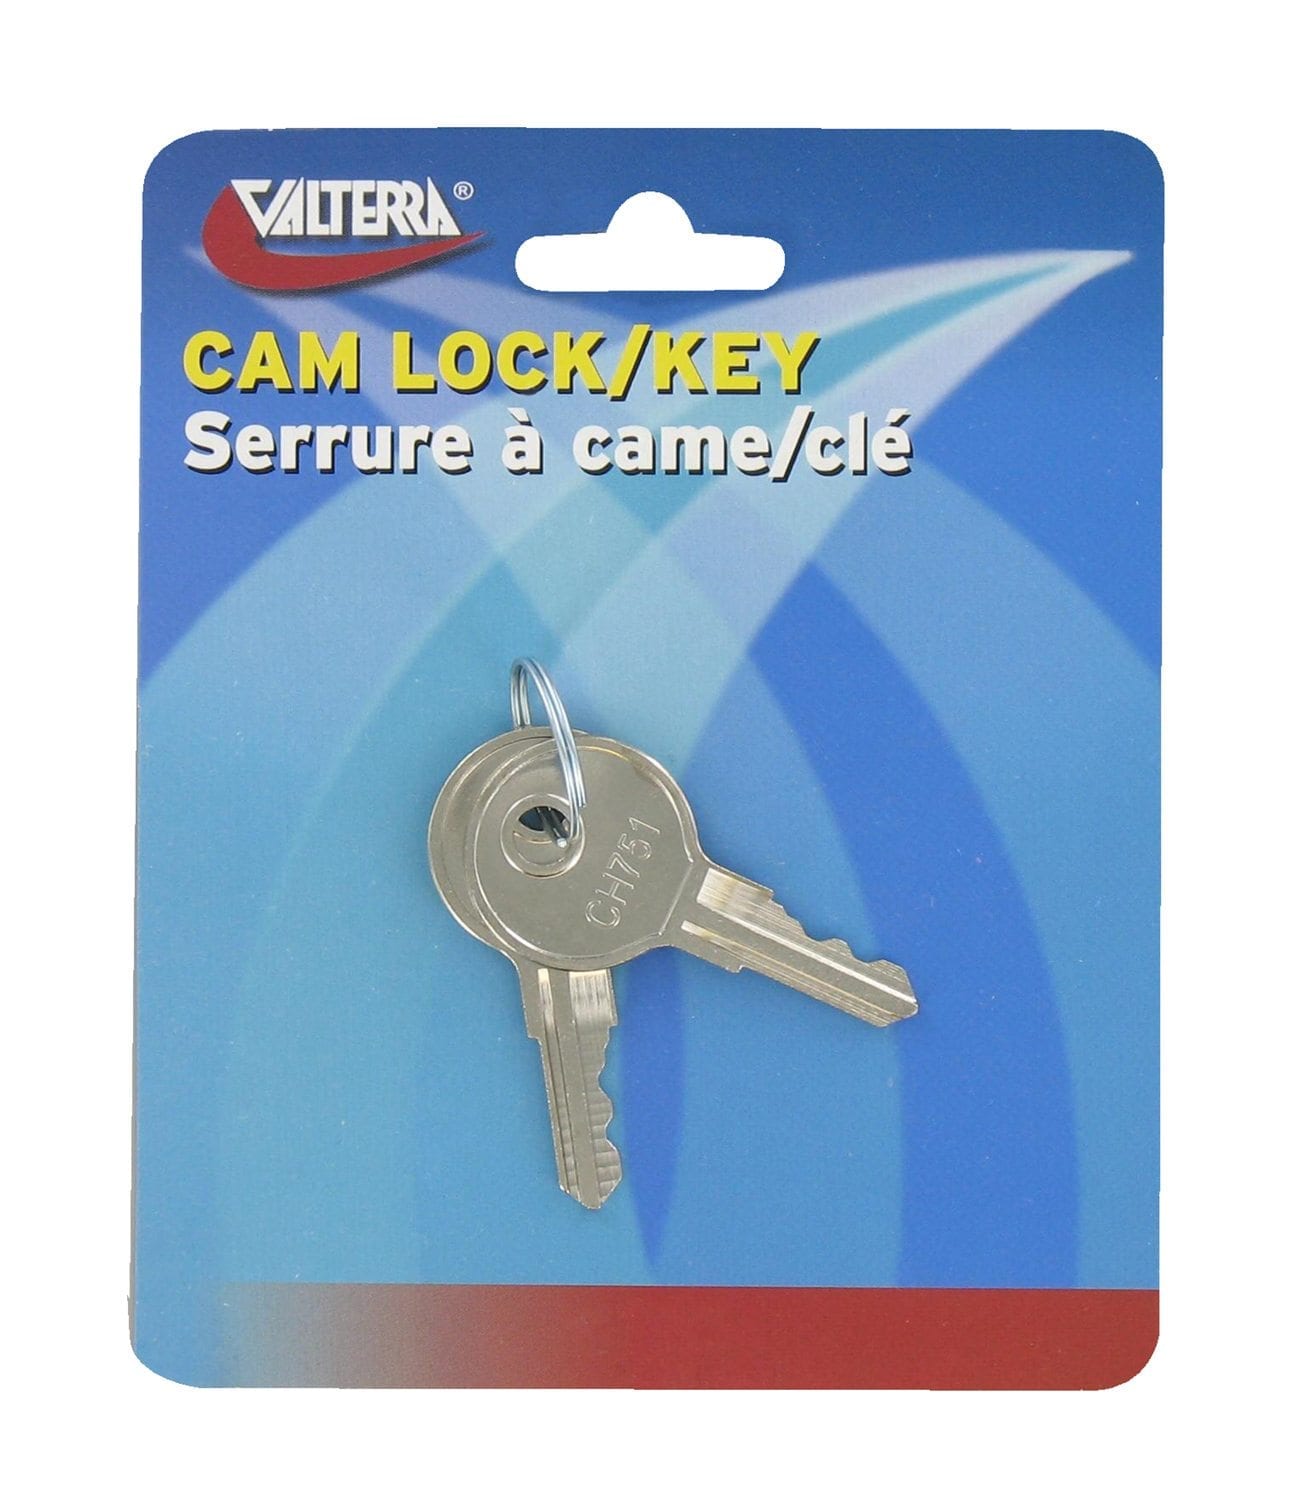 Replacement Key For Cam Locks 751